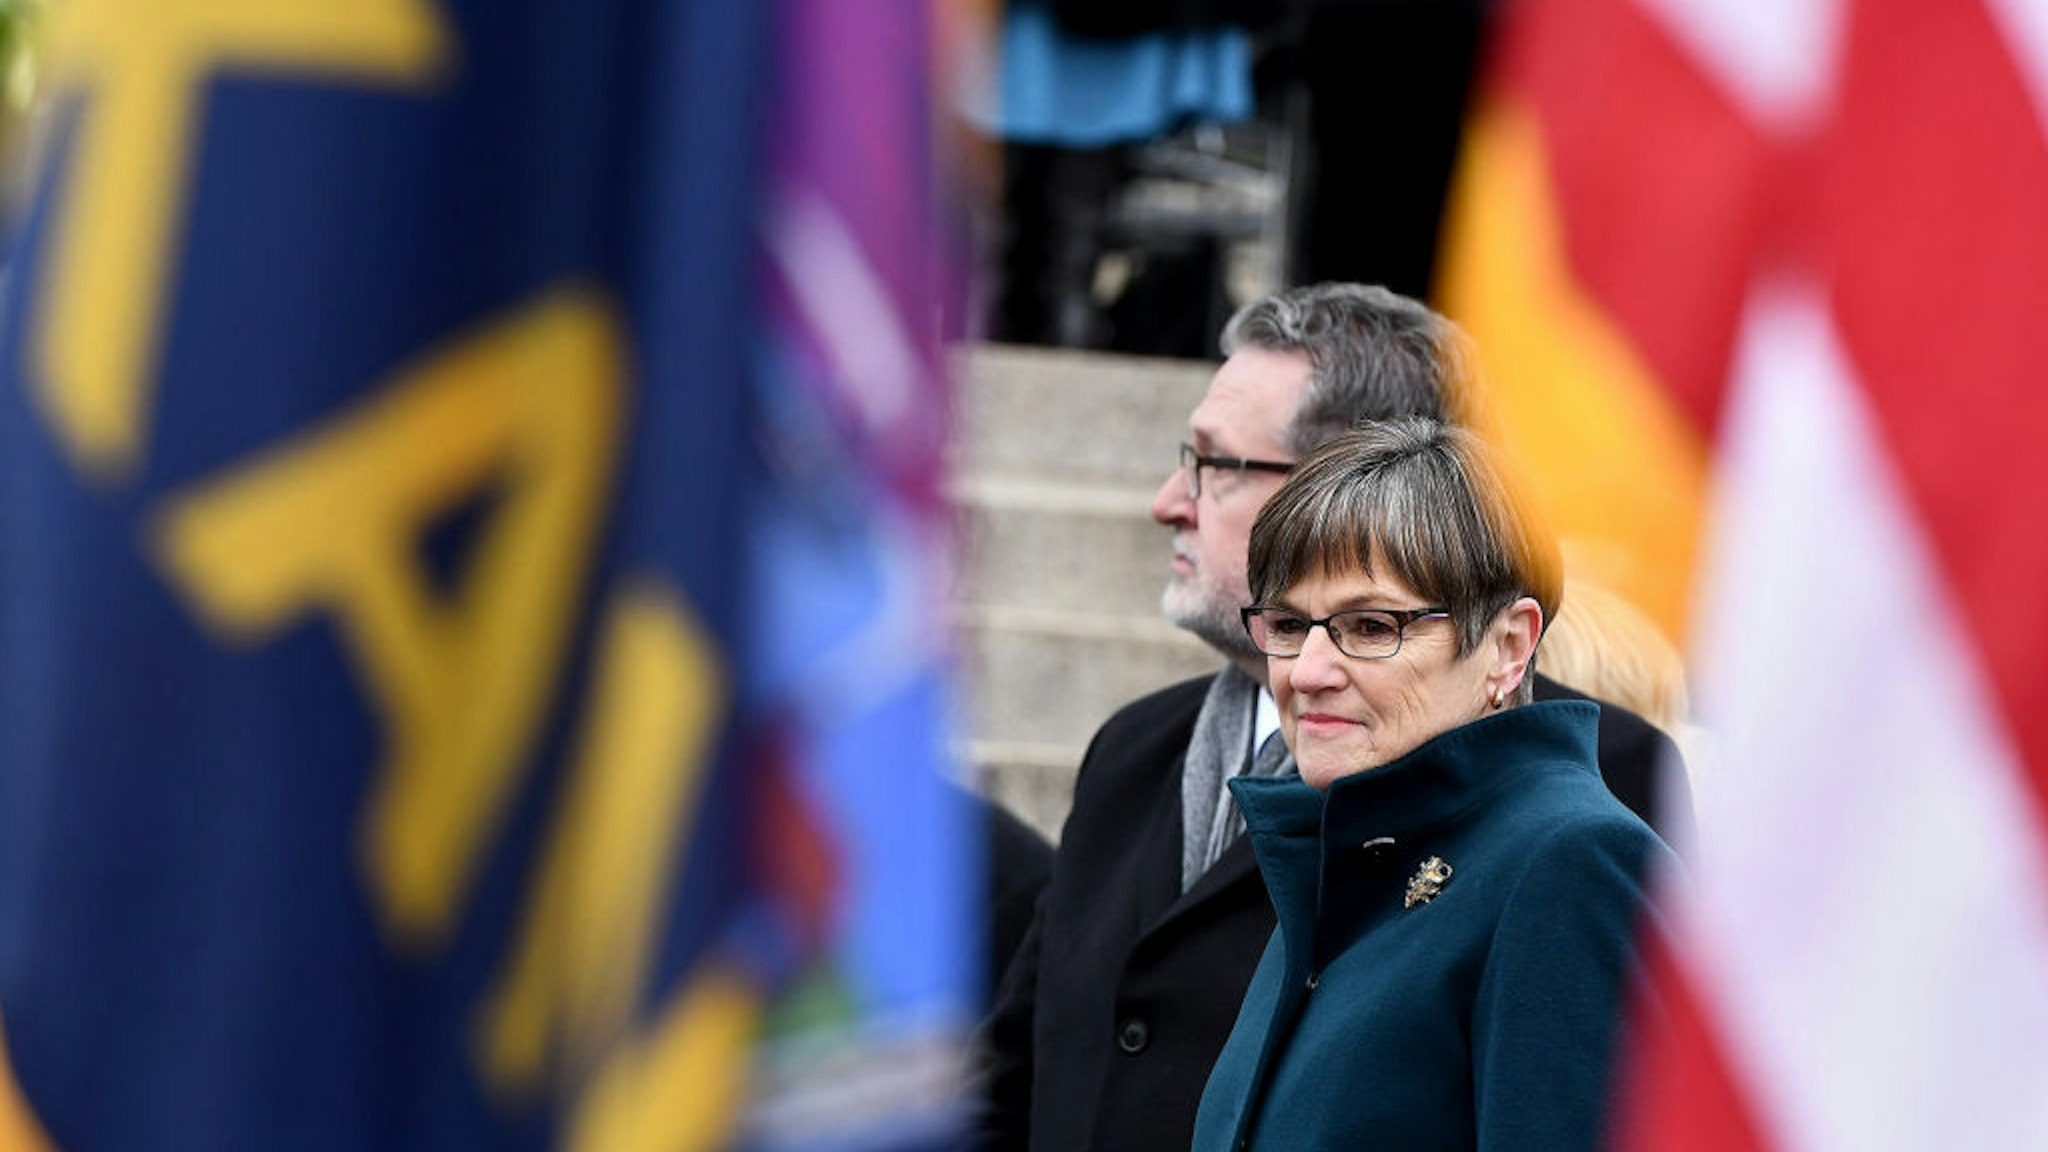 Laura Kelly sworn in as Kansas governor, promising a new chapter after partisan fights